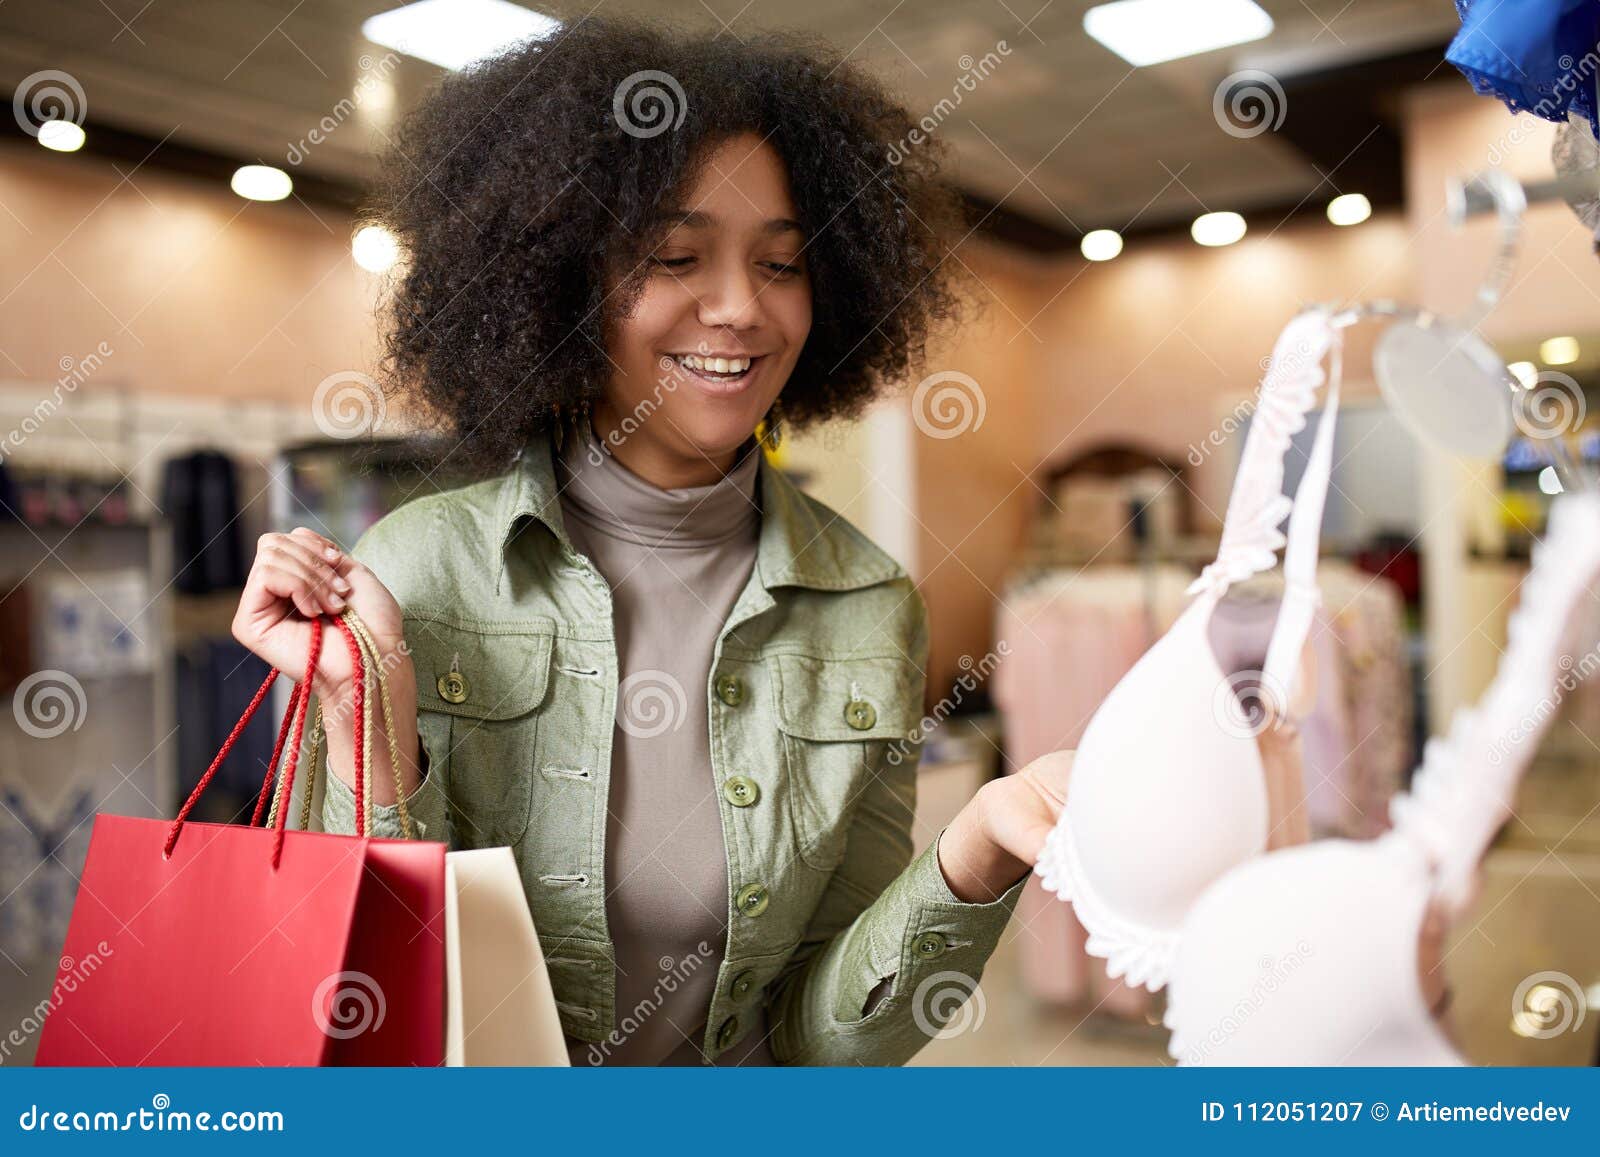 Premium Photo  Two happy multiethnic young mixed race woman shopping for lingerie  near clothing boutique shop window decide whether to purchase african  american girl considers underwear with friend at shop front